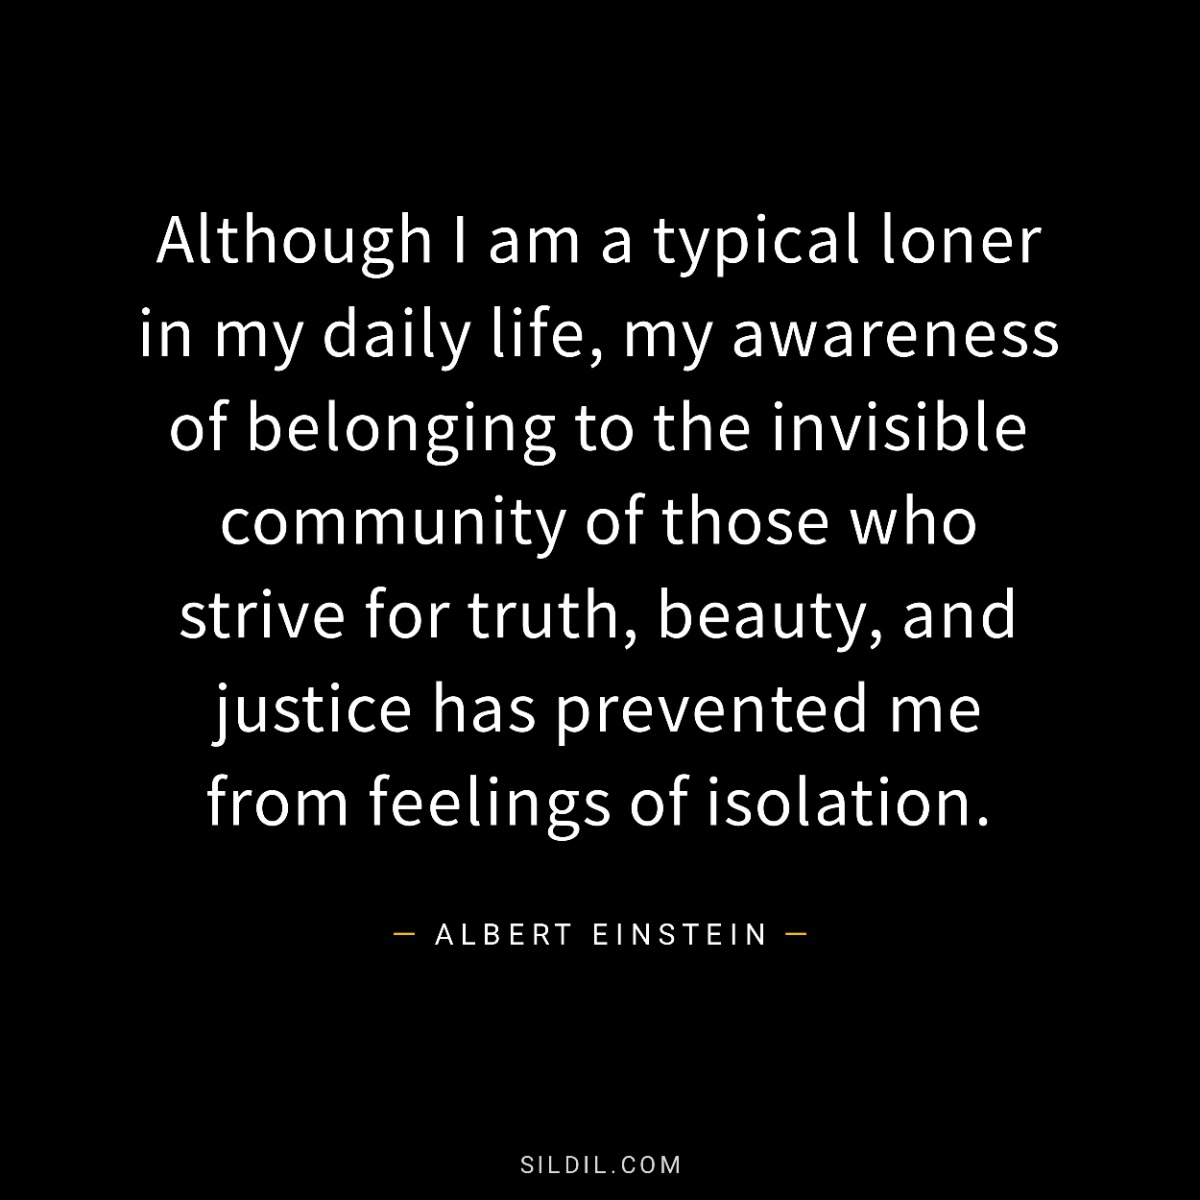 Although I am a typical loner in my daily life, my awareness of belonging to the invisible community of those who strive for truth, beauty, and justice has prevented me from feelings of isolation.